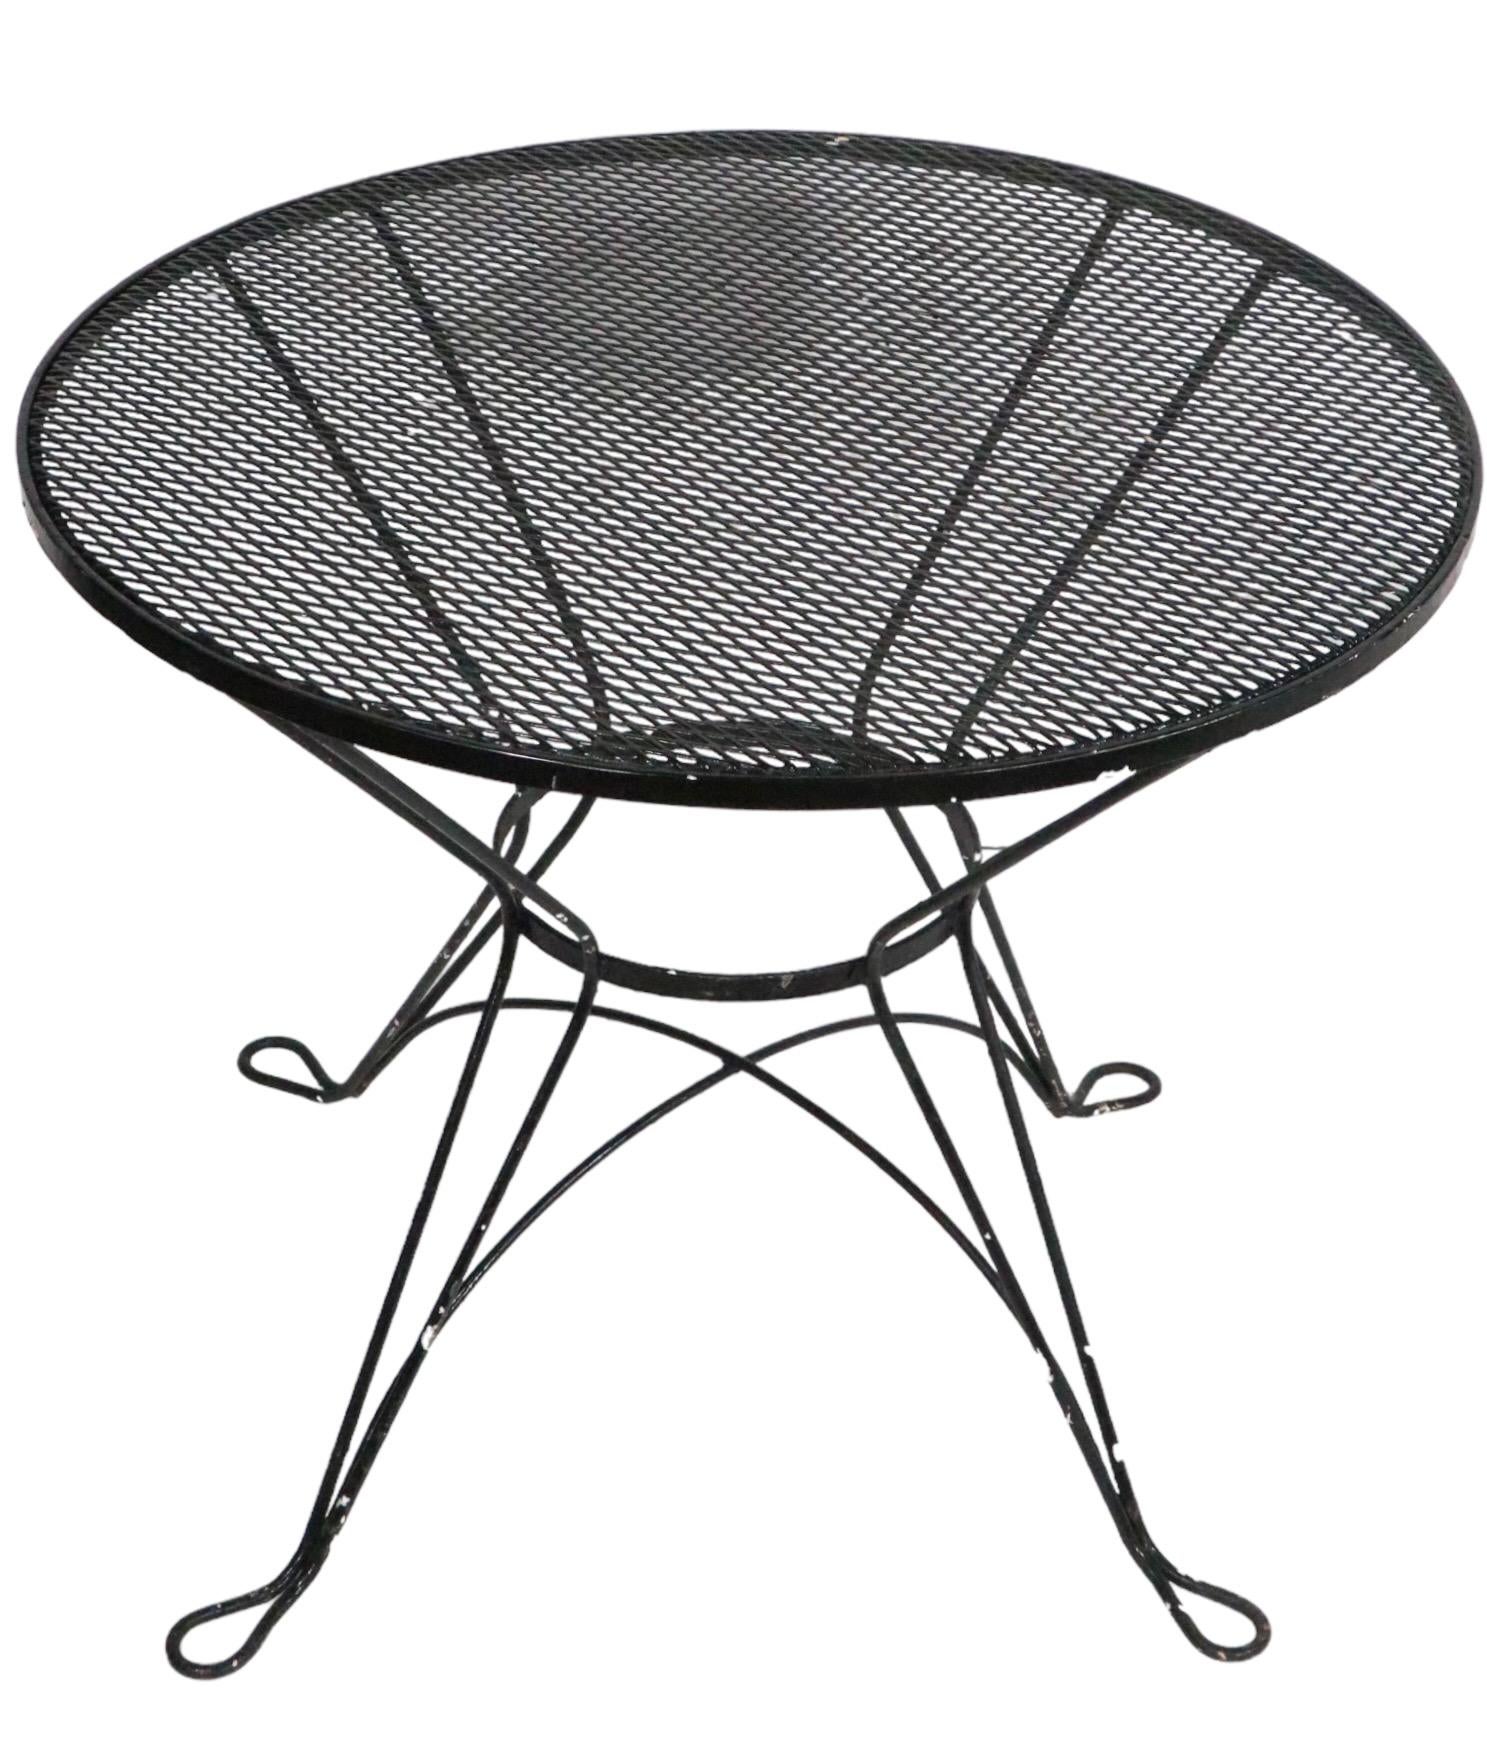 Chic architectural garden, patio, poolside dining, cafe style table in wrought iron and metal mesh. The table has a circular metal mesh top ( 35 in. Dia.)  which is mounted on a waisted form iron  pedestal base. It is in very good, original, clean